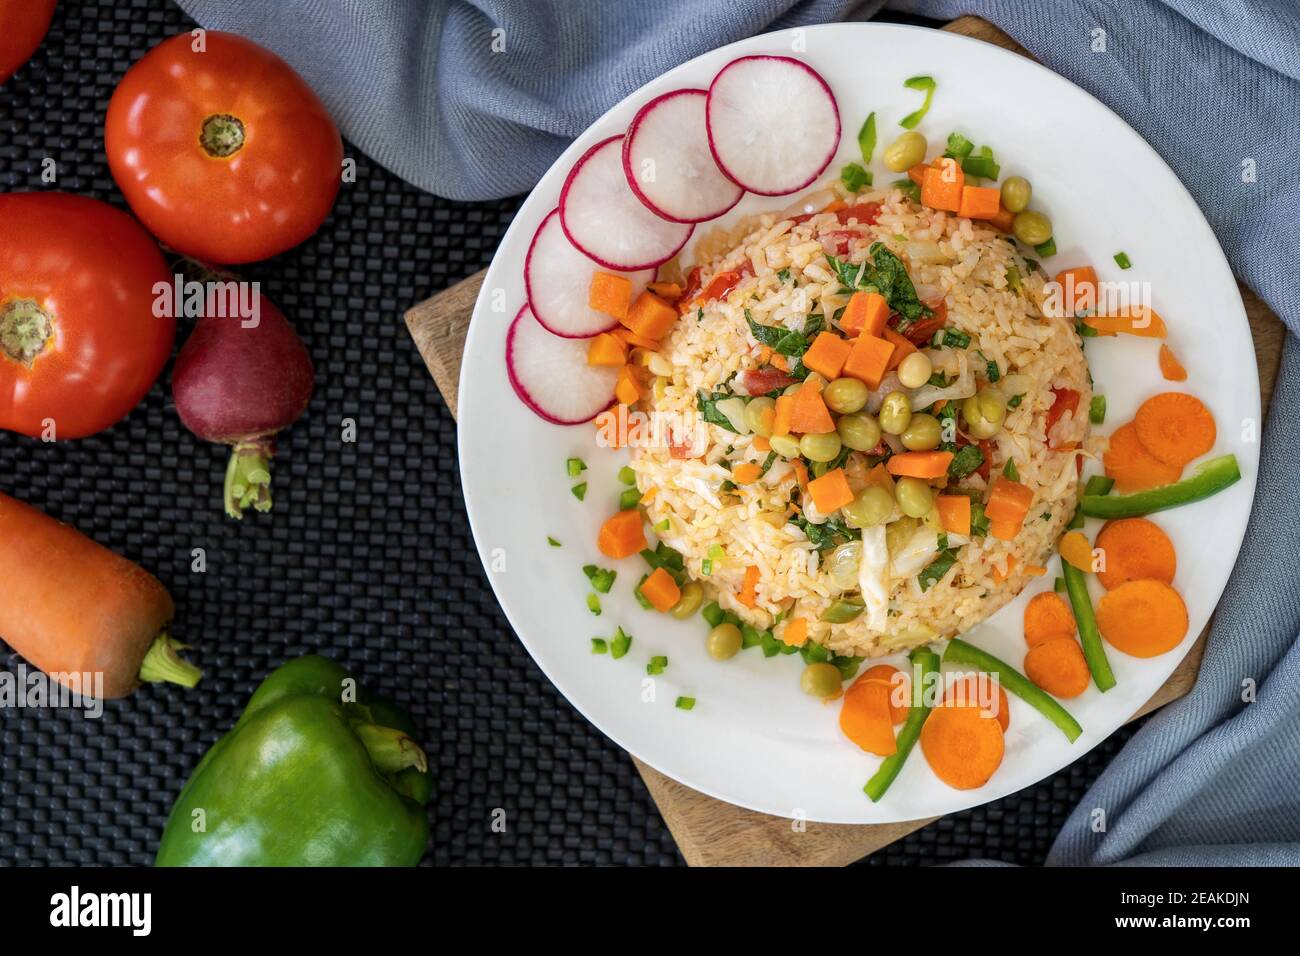 Rice with vegetables Stock Photo